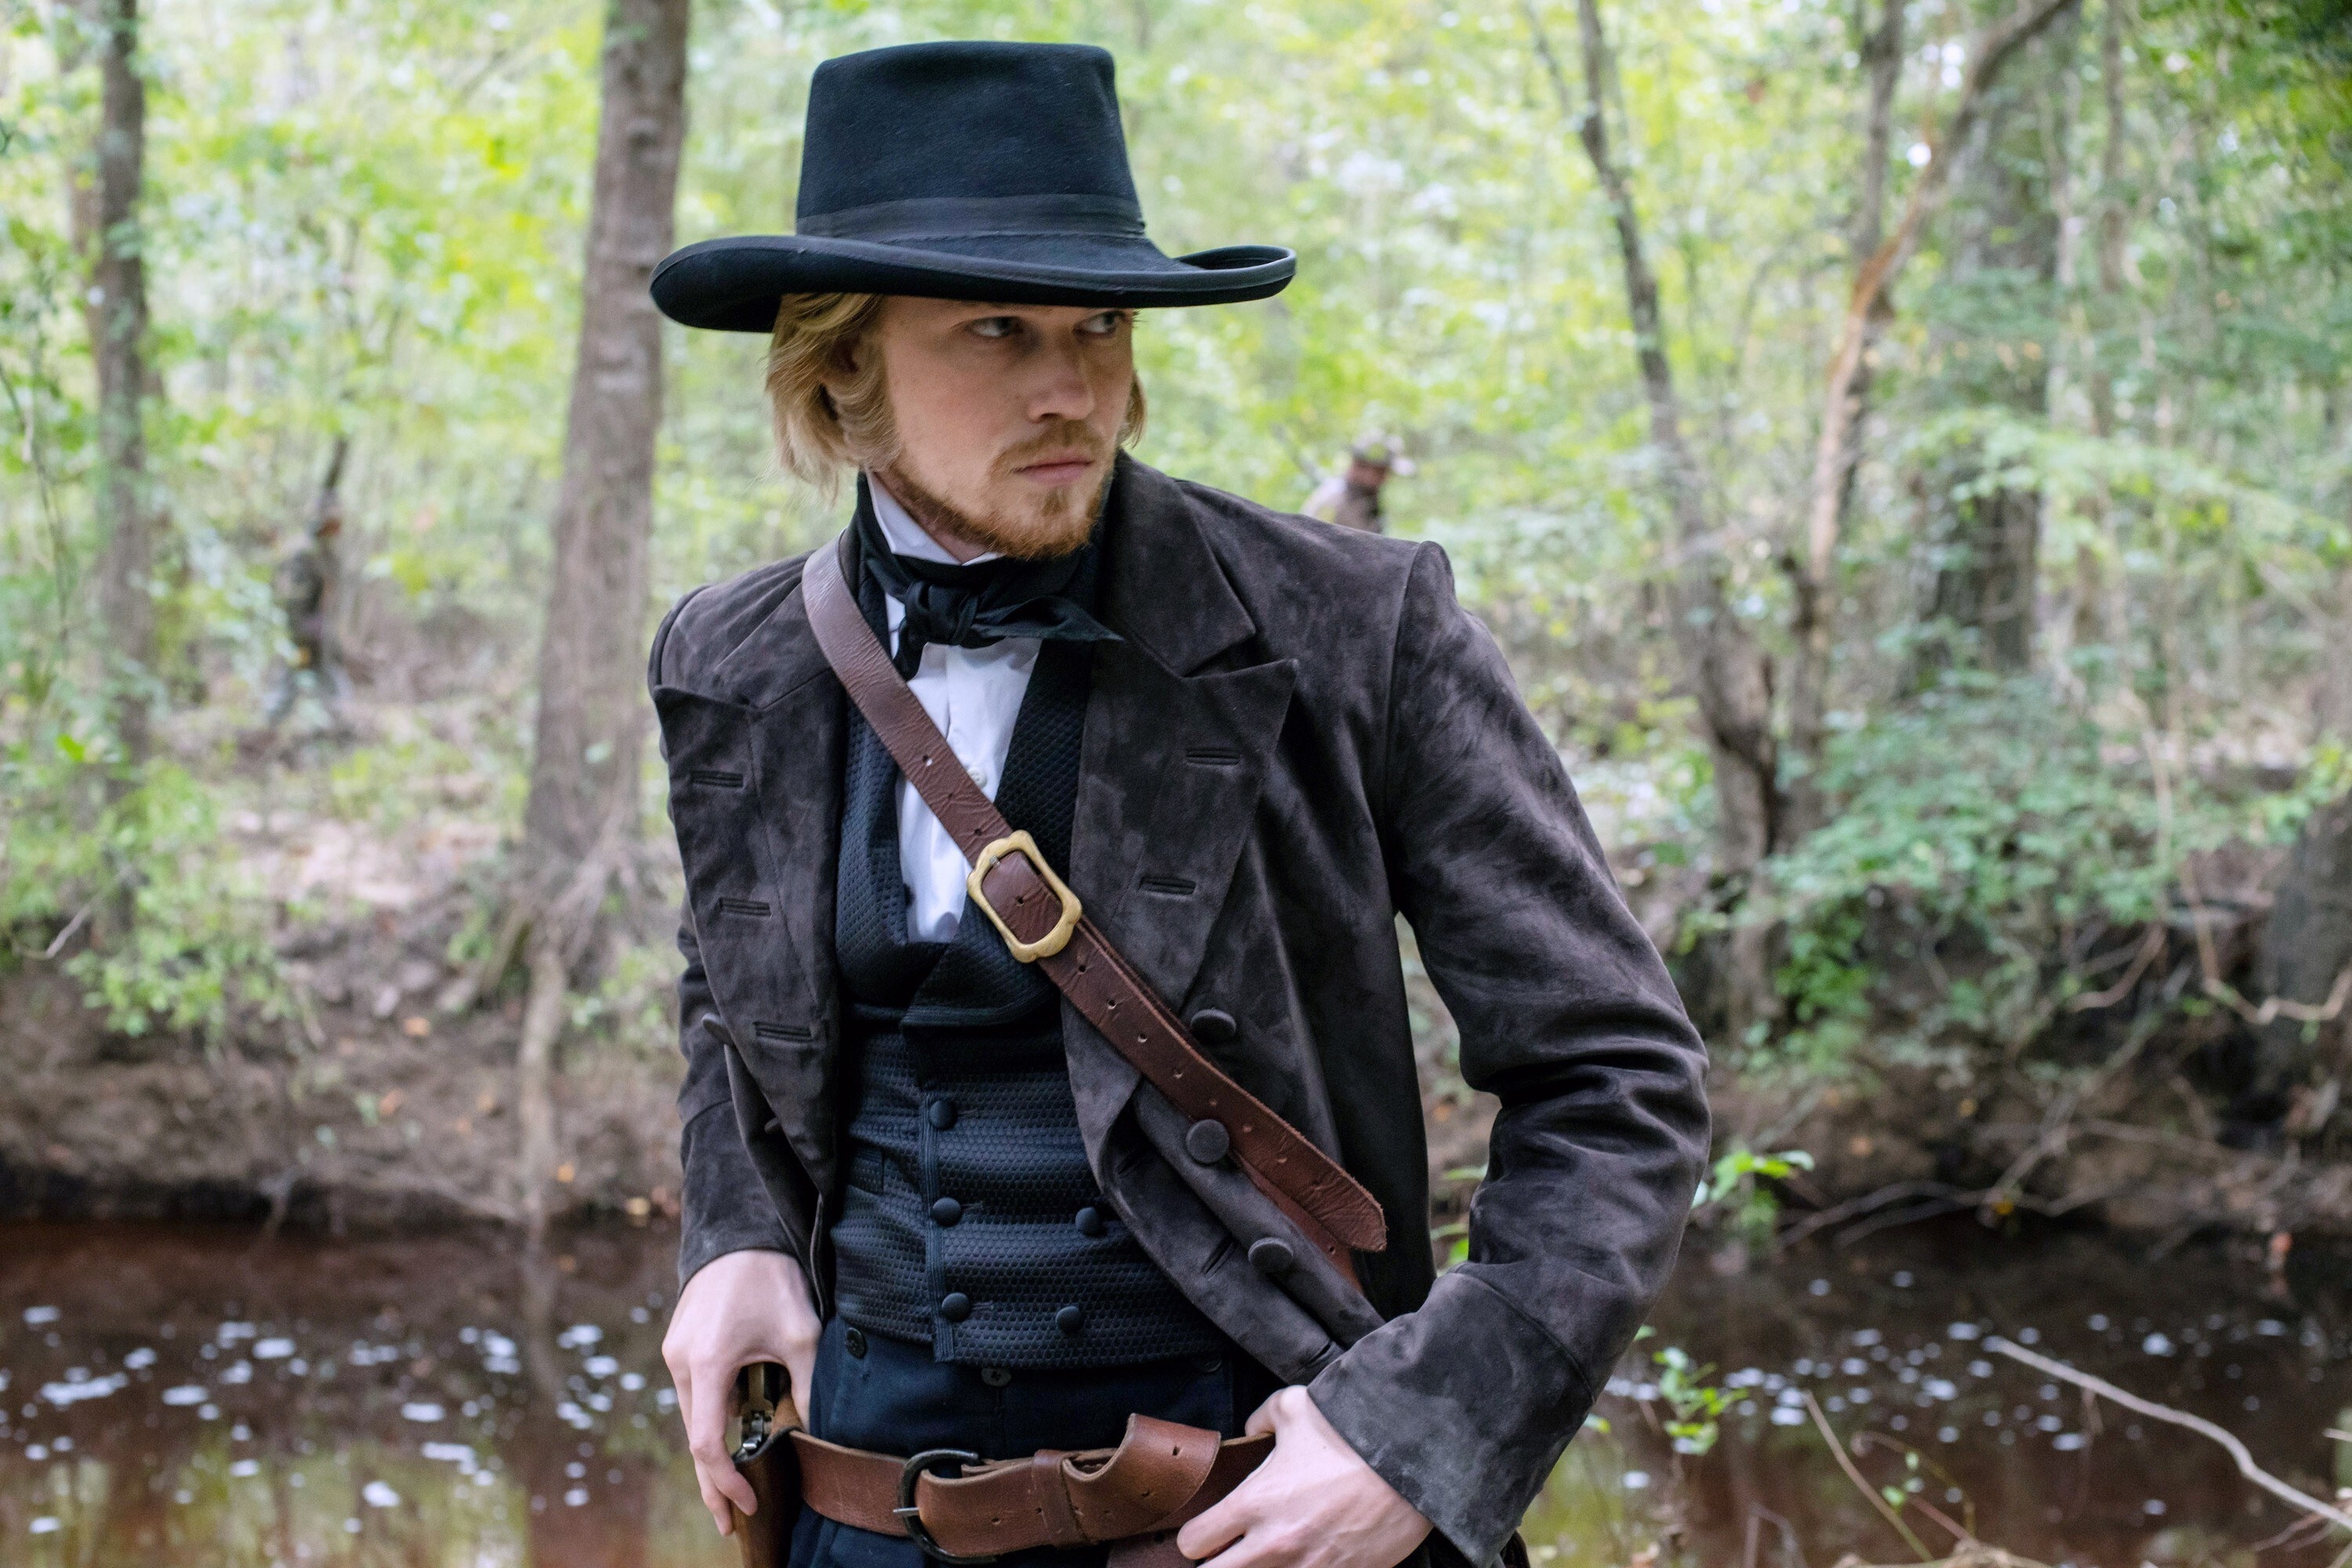 Joe Alwyn stands outside in front of a river; he wears a cowboy hat and has his hand on a gun holster